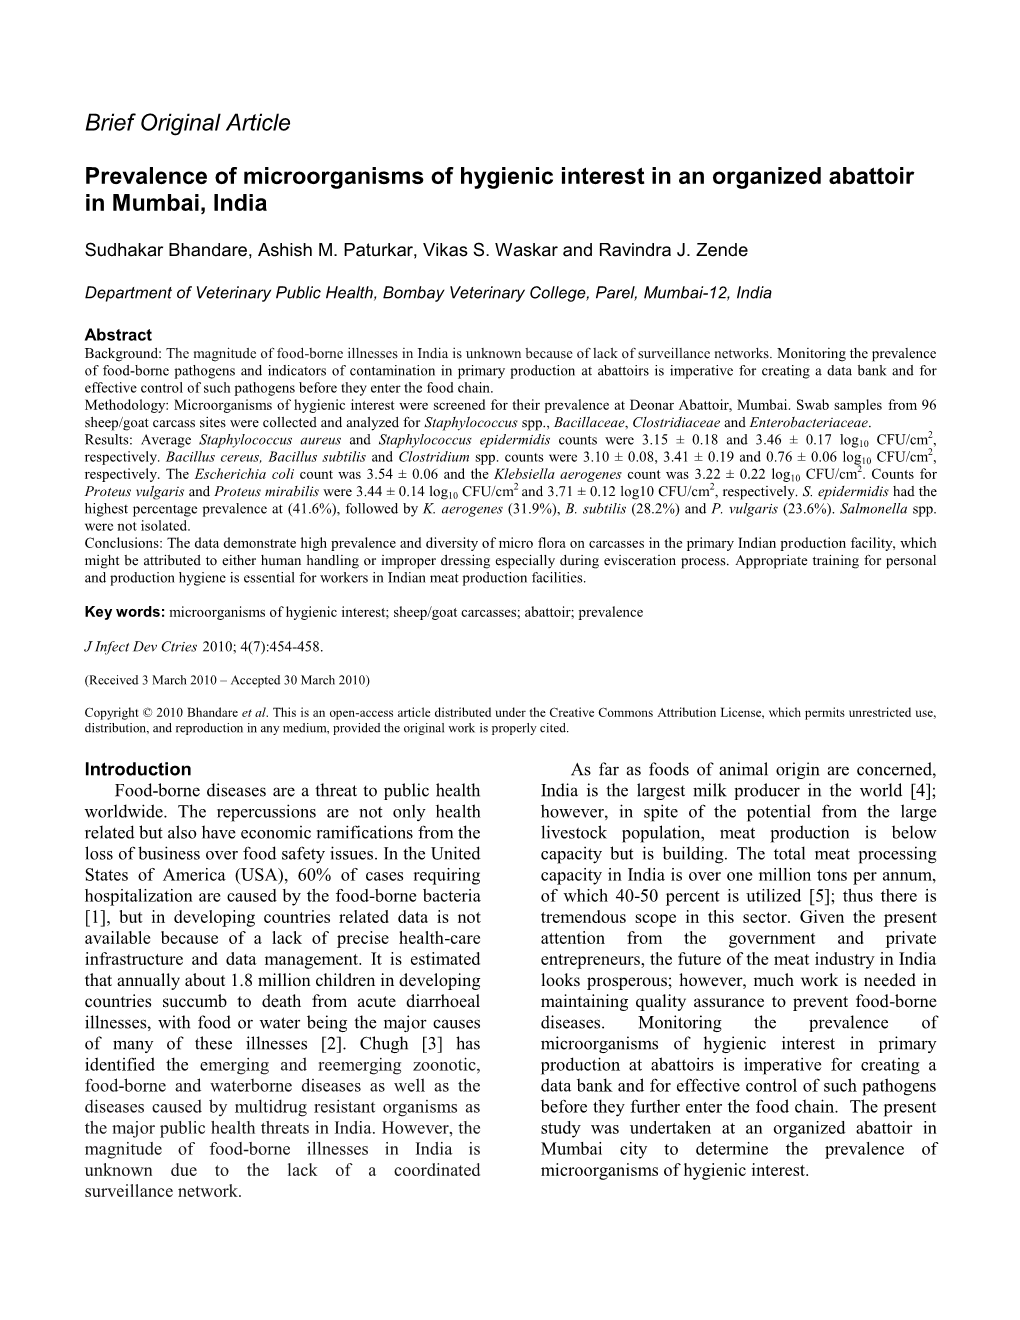 Brief Original Article Prevalence of Microorganisms of Hygienic Interest